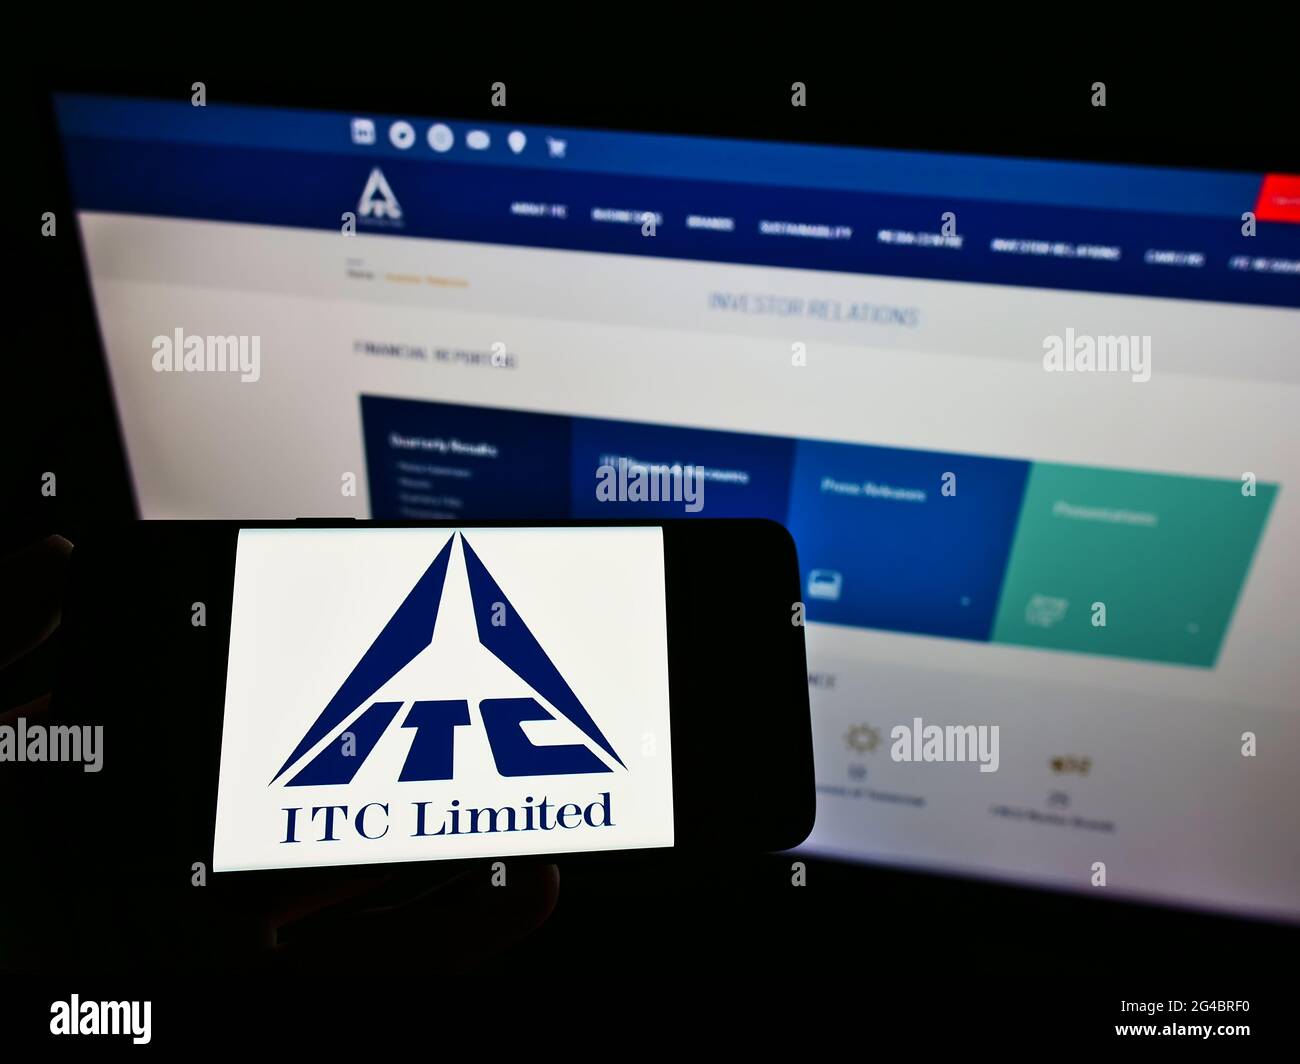 Person holding mobile phone with logo of Indian conglomerate ITC Limited on screen in front of business web page. Focus on phone display. Stock Photo